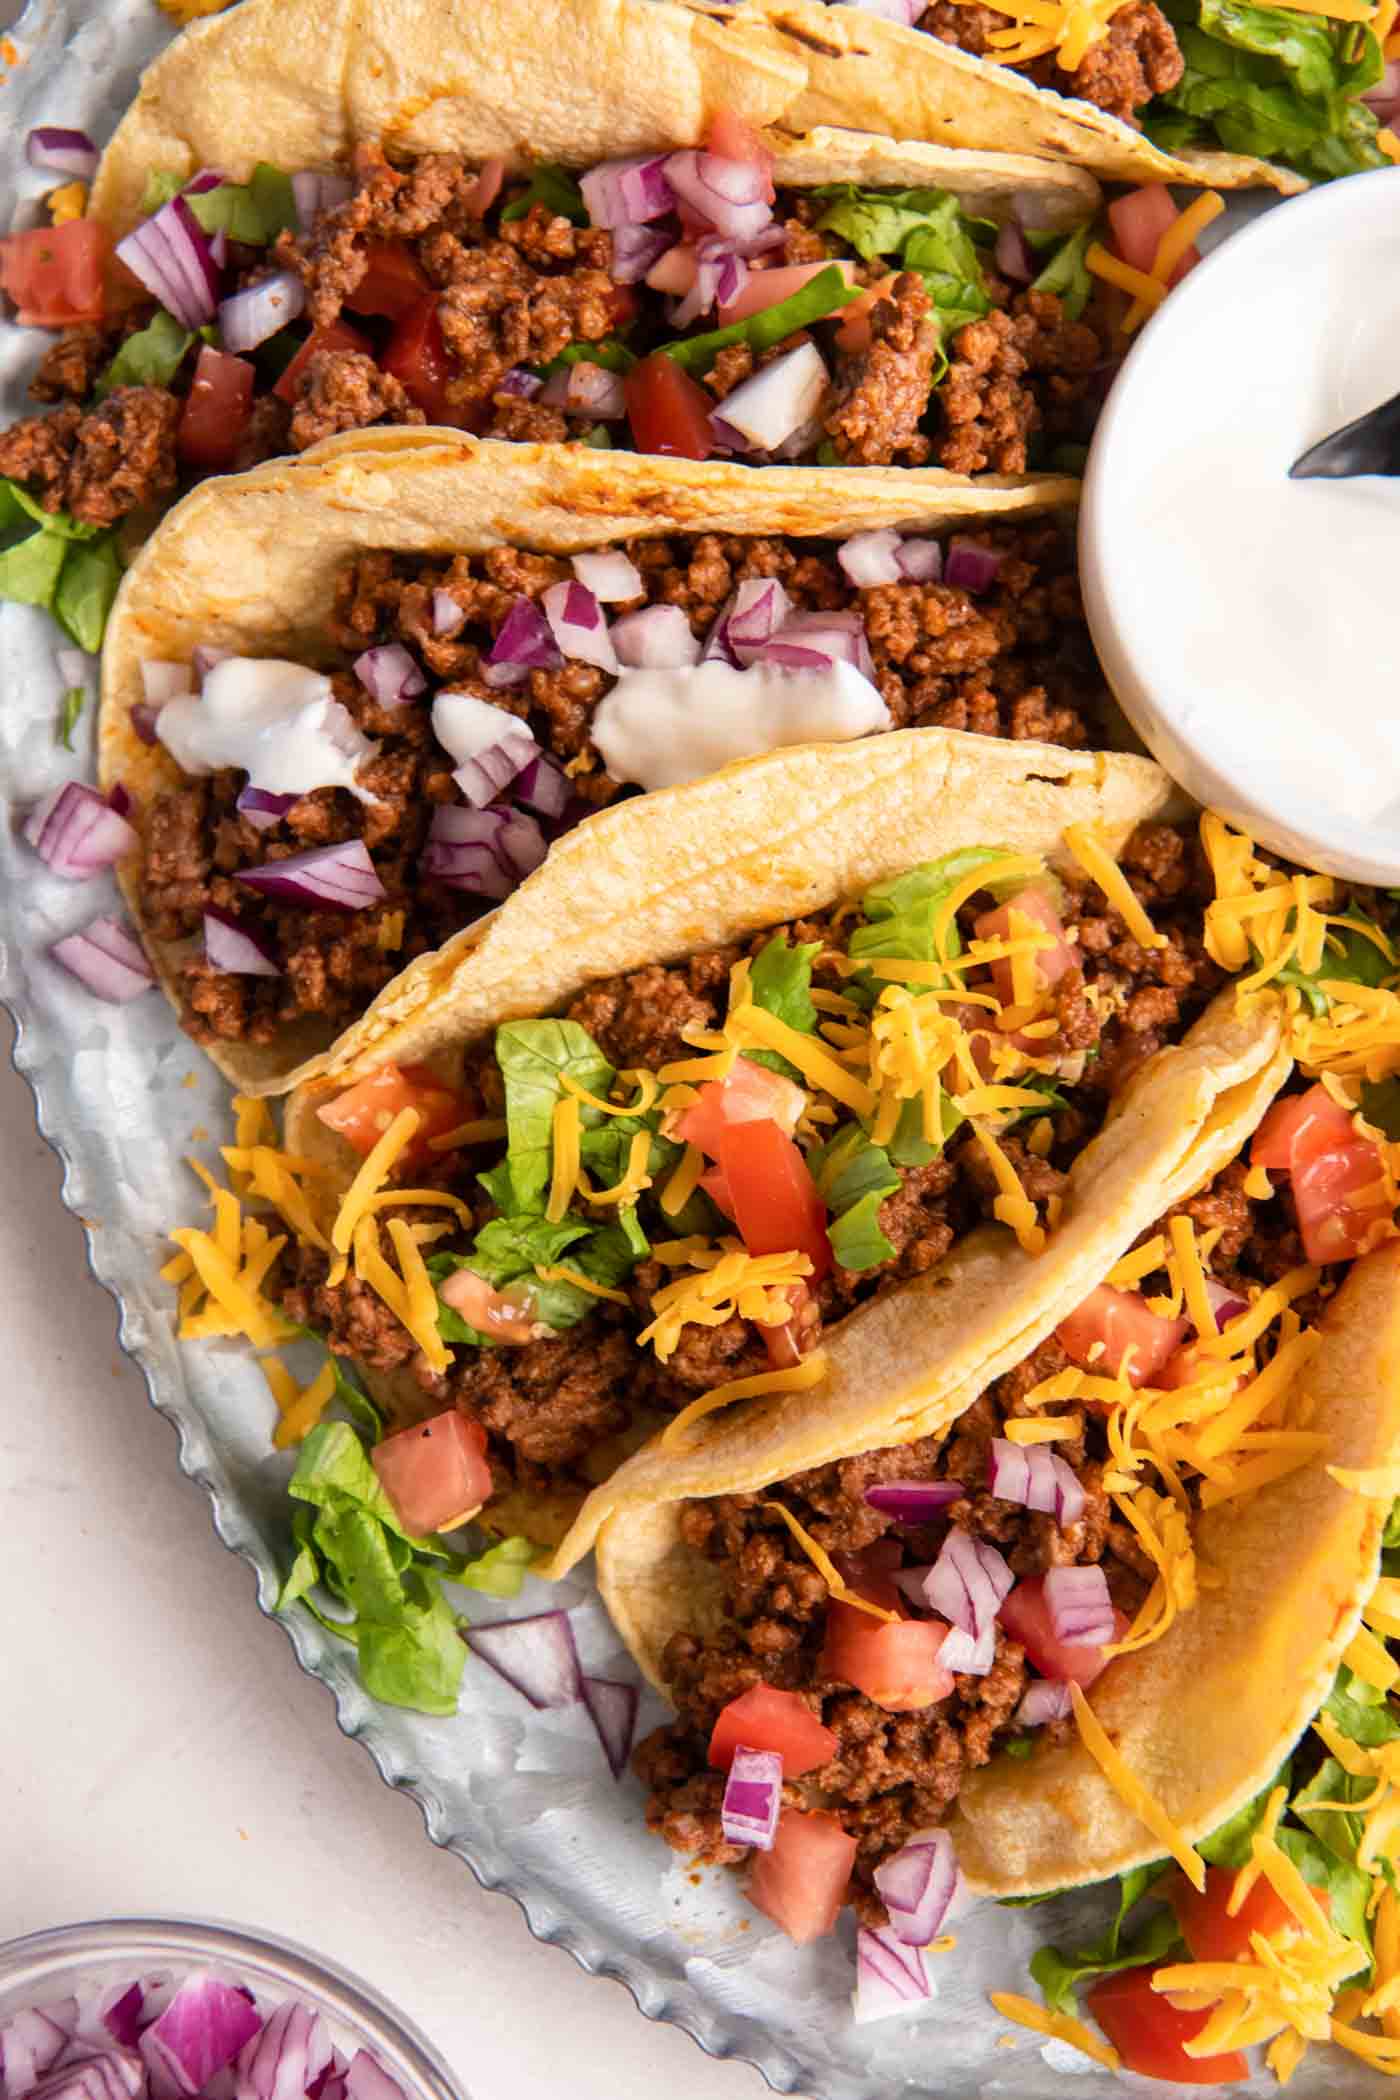 Ground beef taco meat served in soft corn tortillas with a variety of toppings.